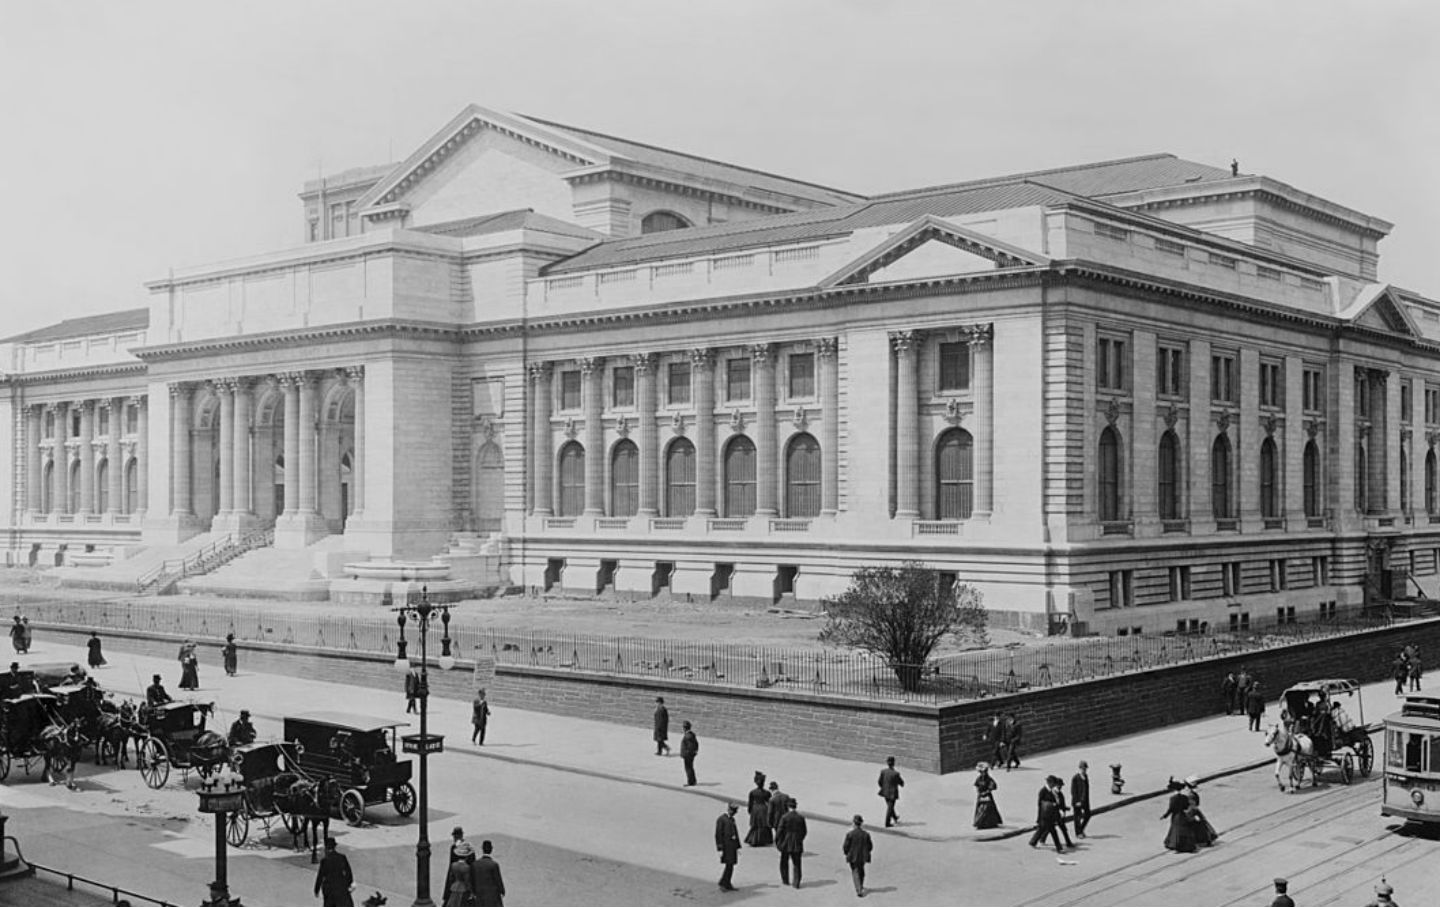 May 23, 1911: The New York Public Library Opens on 42nd Street